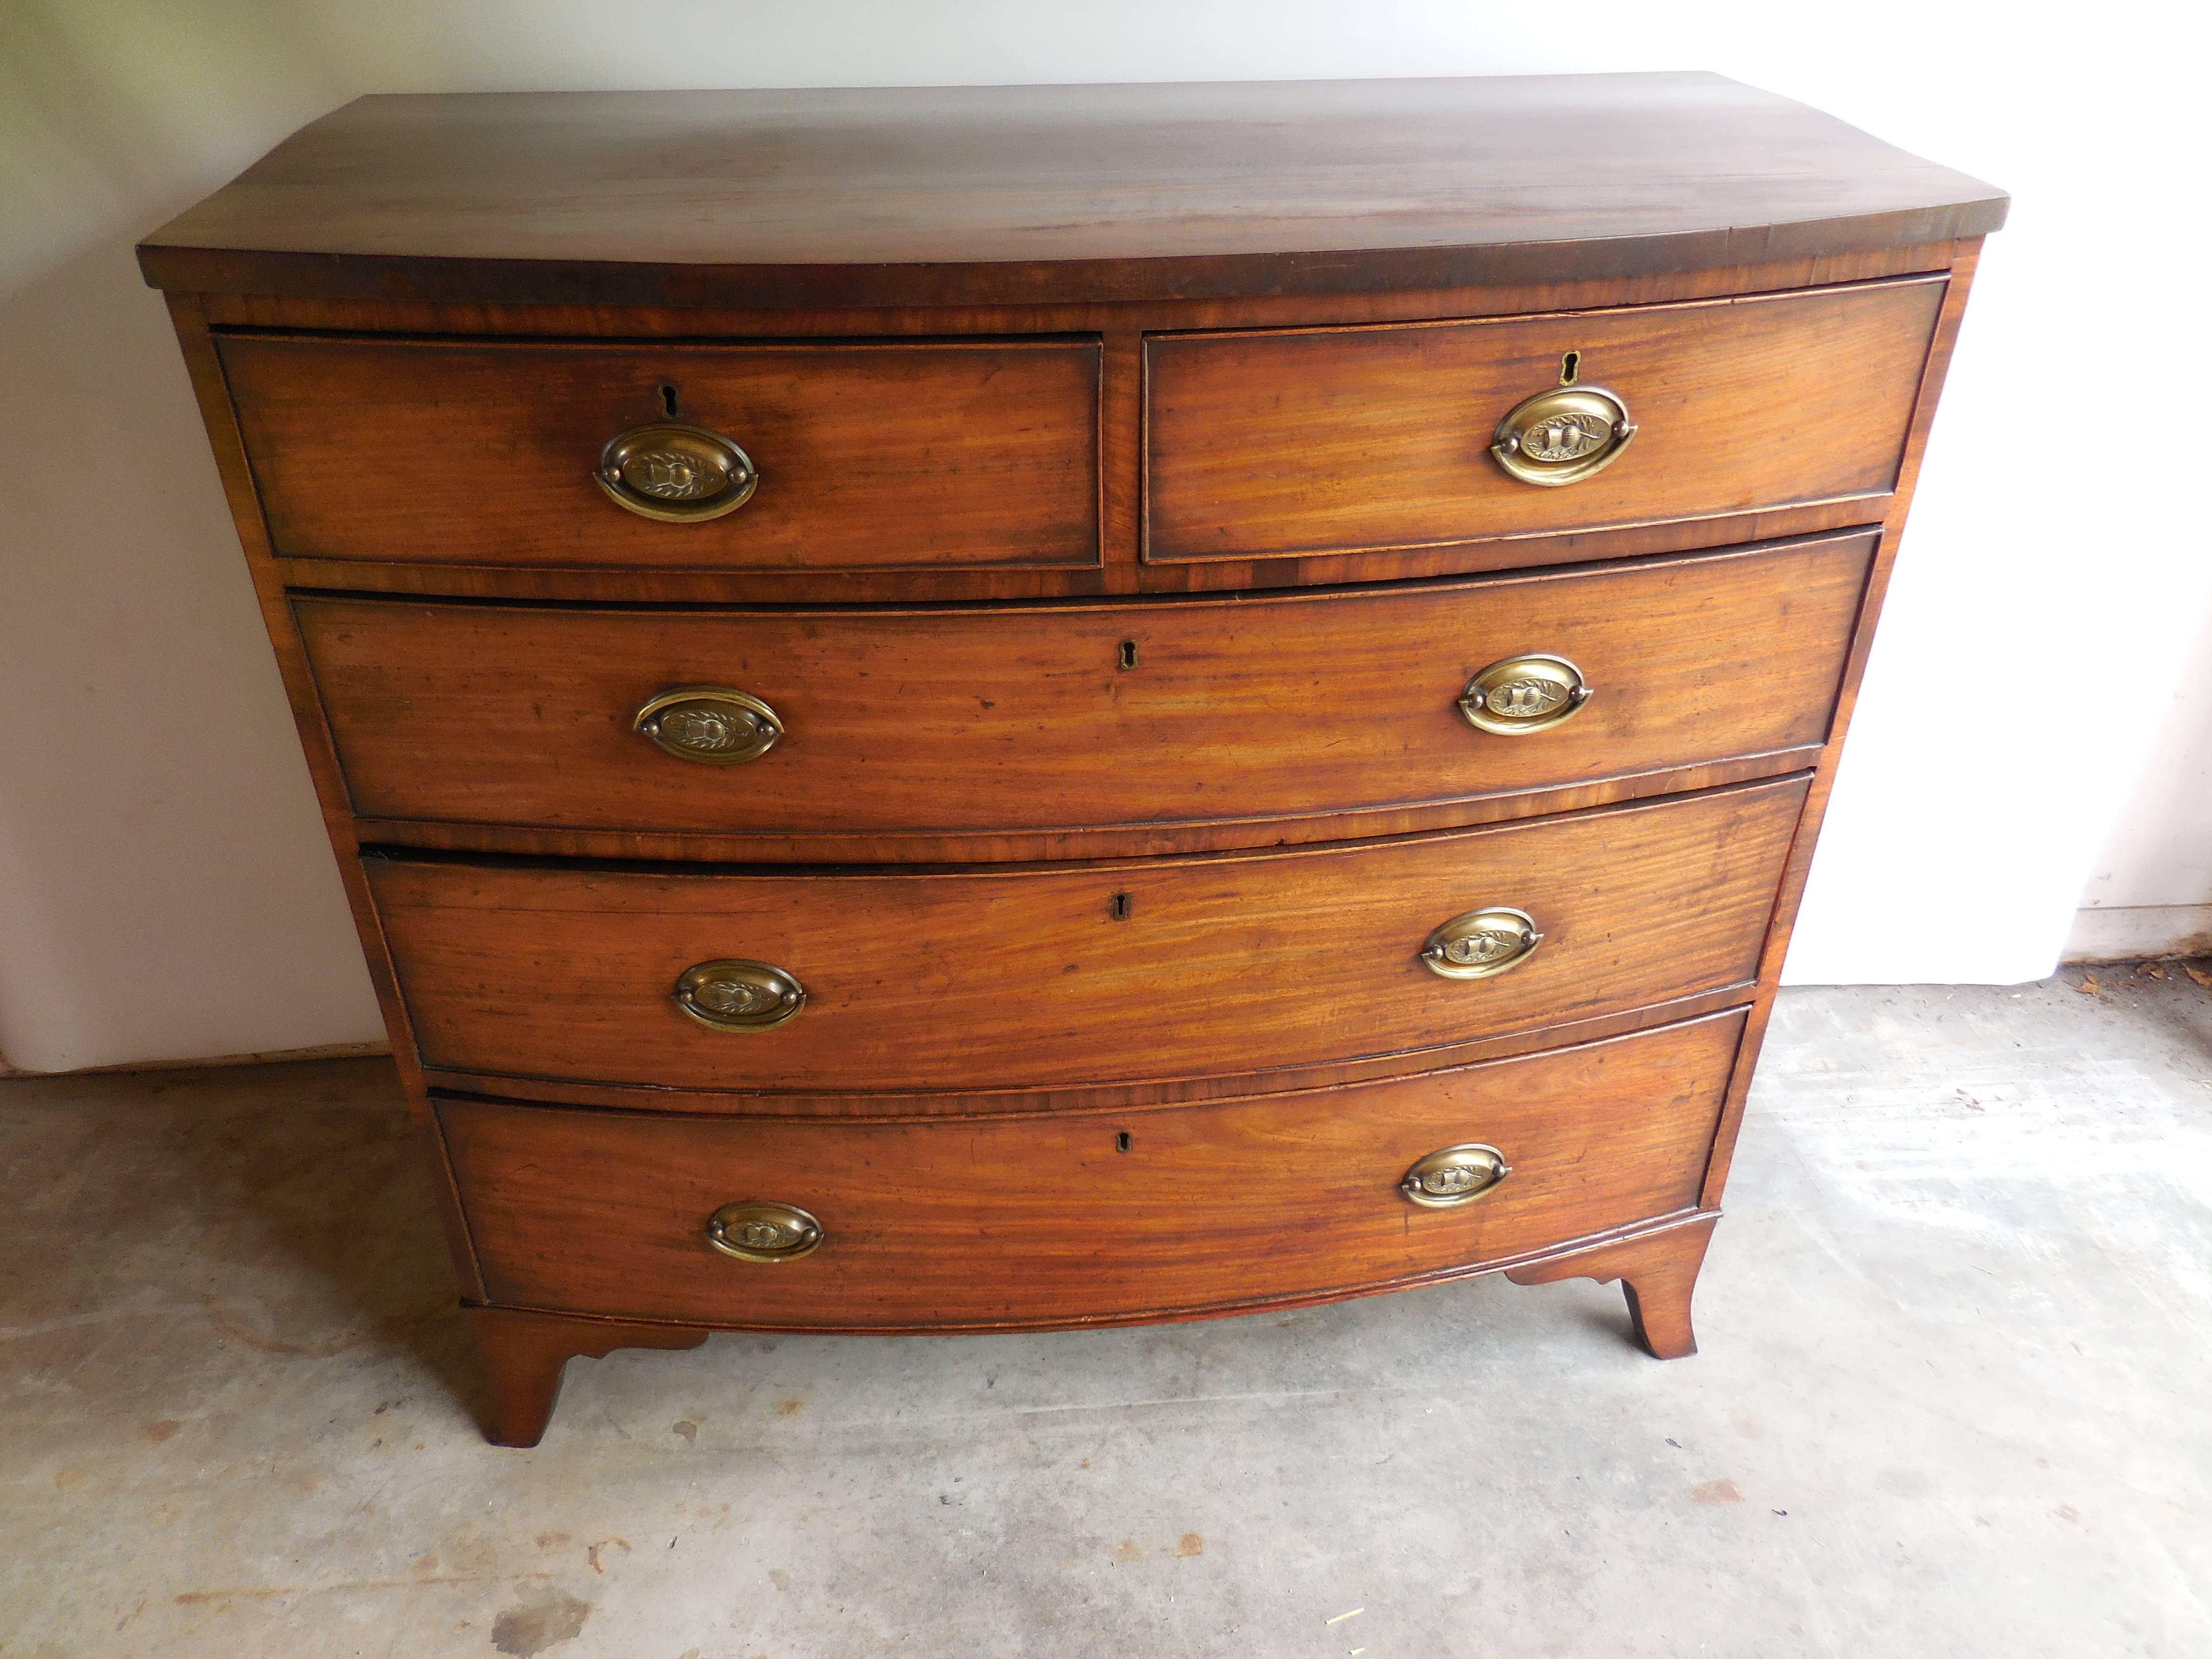 19th century English five drawer chest with brass handles. One crack on top consistent with age.